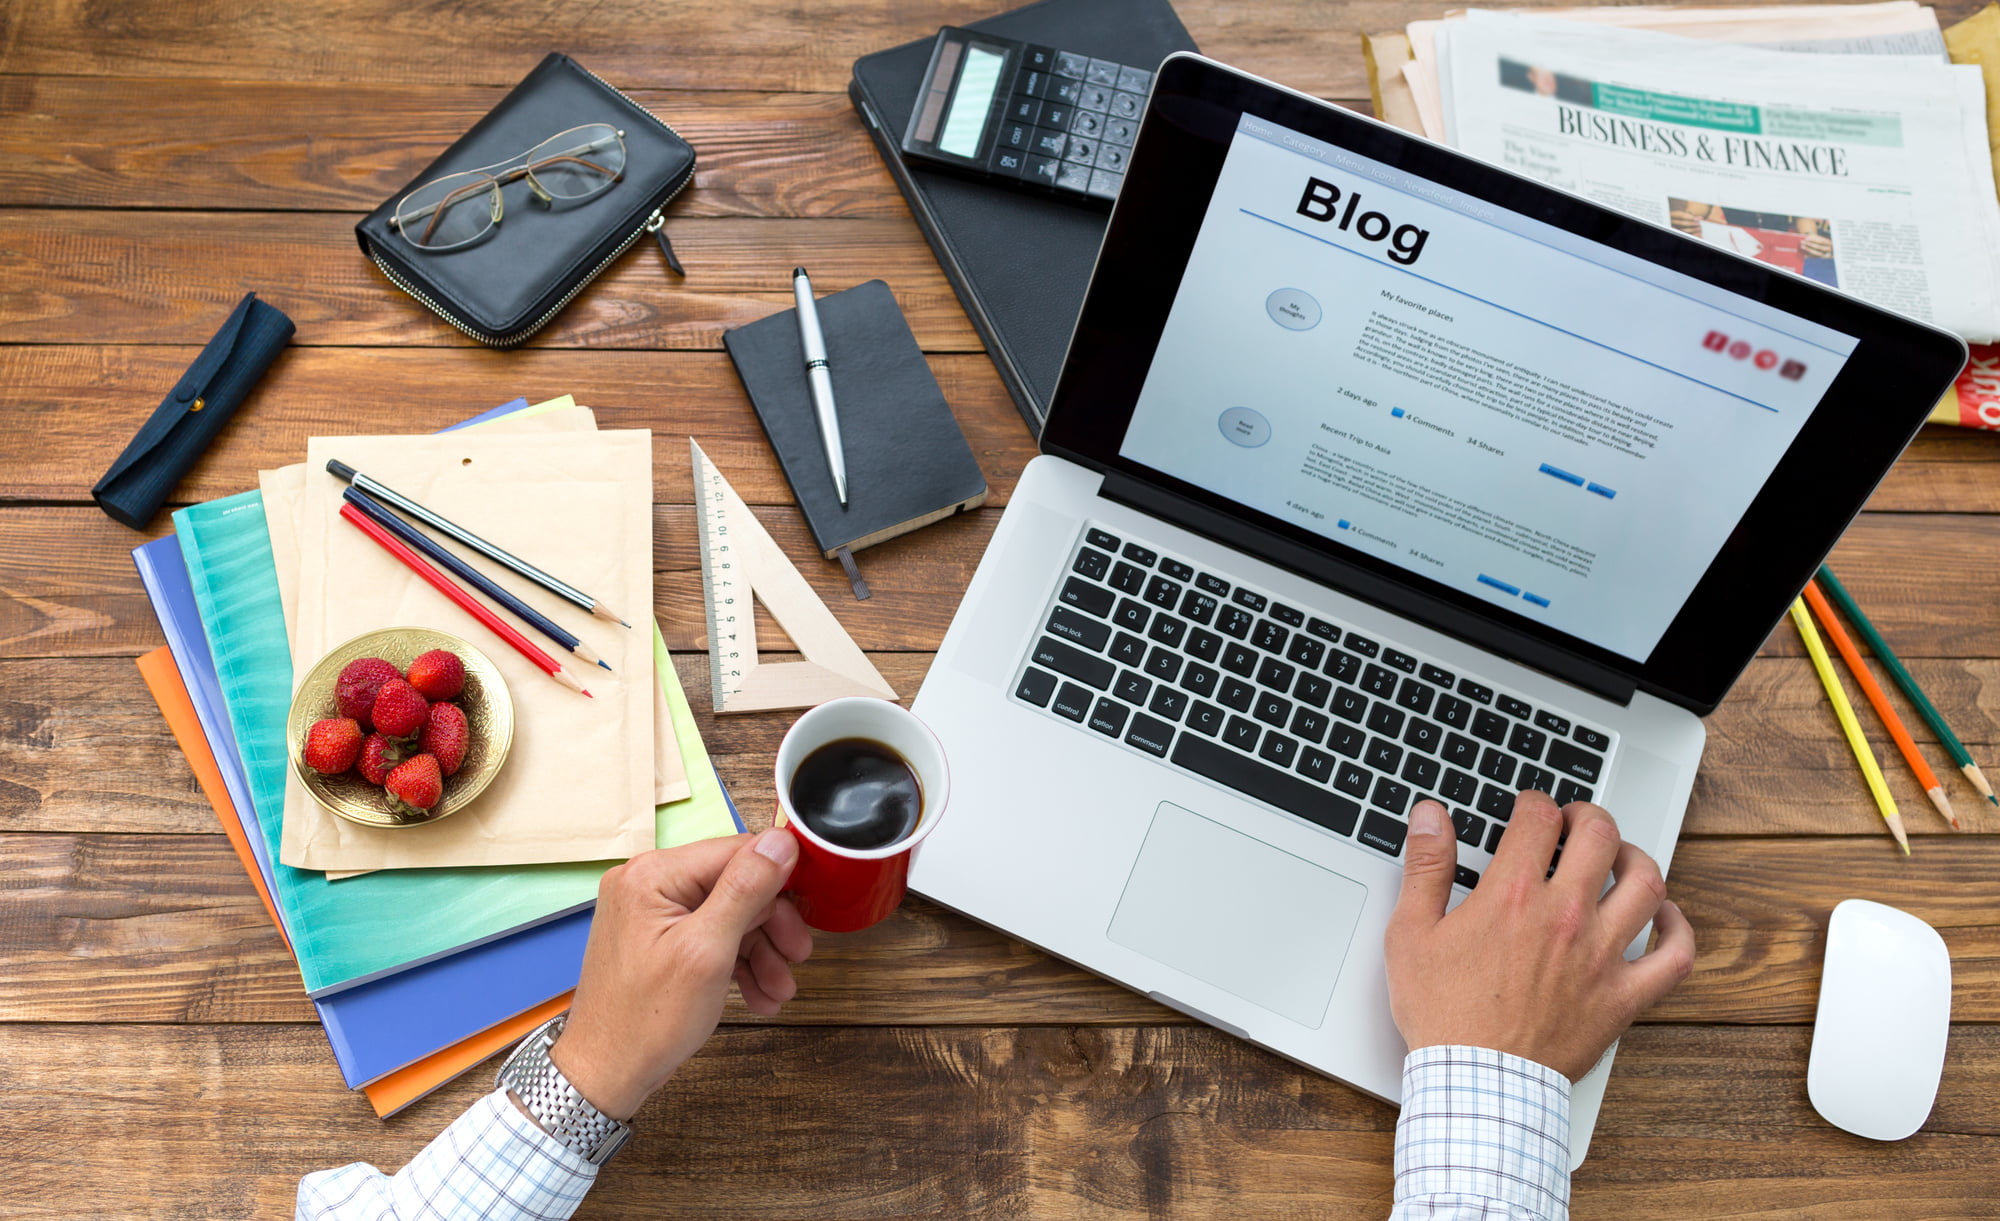 If your company does not have a blog, then it's time to make one. Click here to discover 5 benefits of creating a business blog.